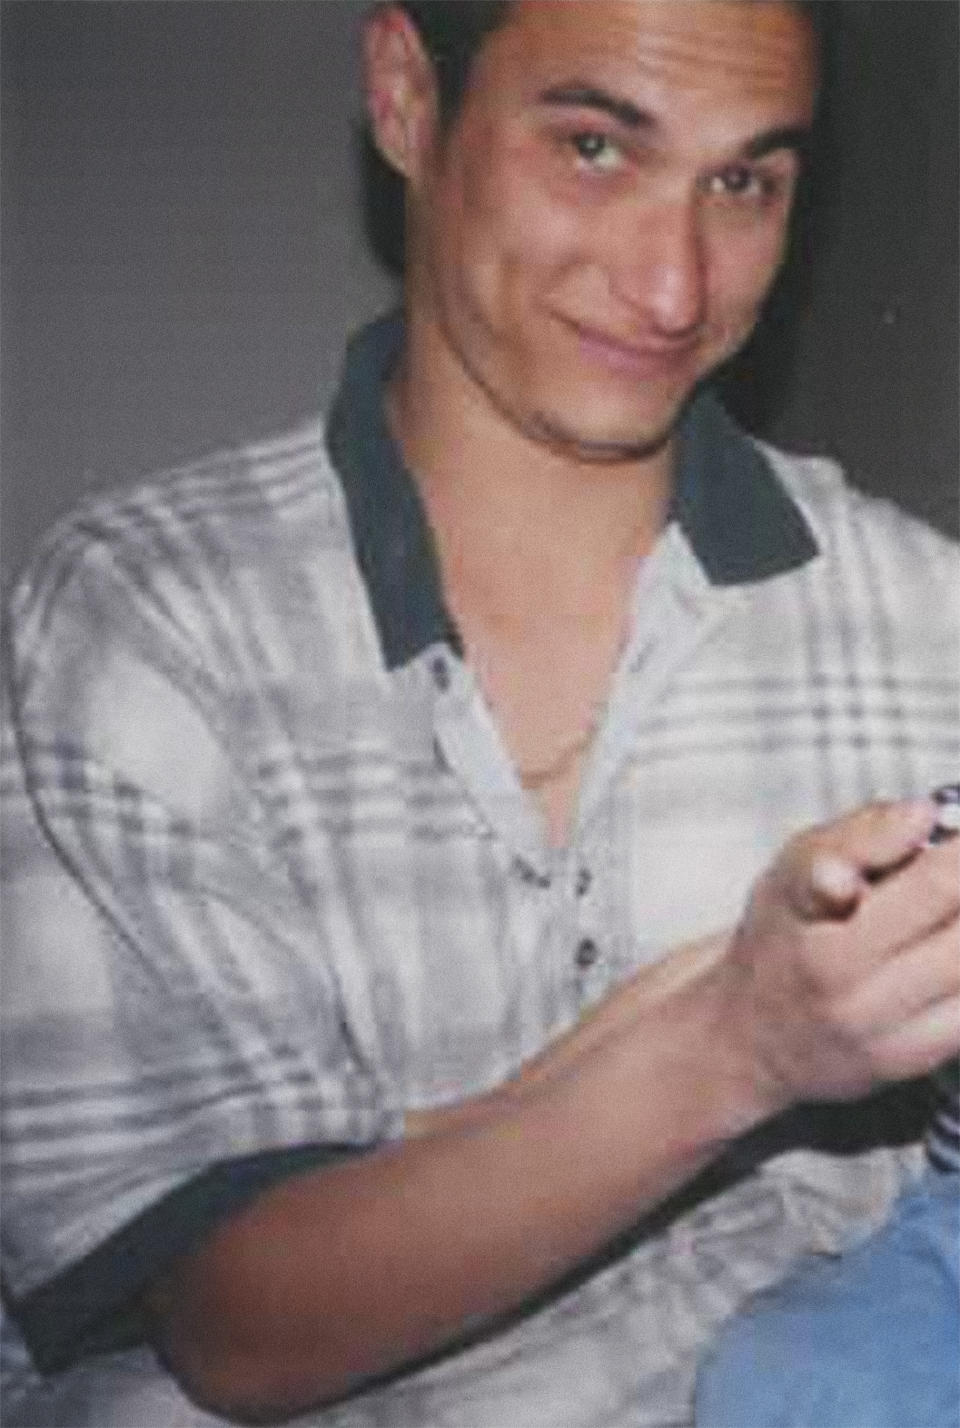 This undated photo provided by Jean Lawniczak in May 2019 shows her late son, John Orlando. A fight led to his 2016 arrest on charges of public drunkenness and assault. The 41-year-old, who suffered from schizophrenia, was suicidal when he arrived at Allegheny County Jail in Pennsylvania, court records say. At intake, he declared he was high on recreational drugs and screamed, "I hope I die in here.” Orlando was left unsupervised long enough to construct a noose out of materials in his cell. He hanged himself from his bunk and died in the hospital. Lawniczak and her granddaughter used to visit Orlando’s grave together, until the girl told her that it "hurt her heart too much." (Jean Lawniczak via AP)